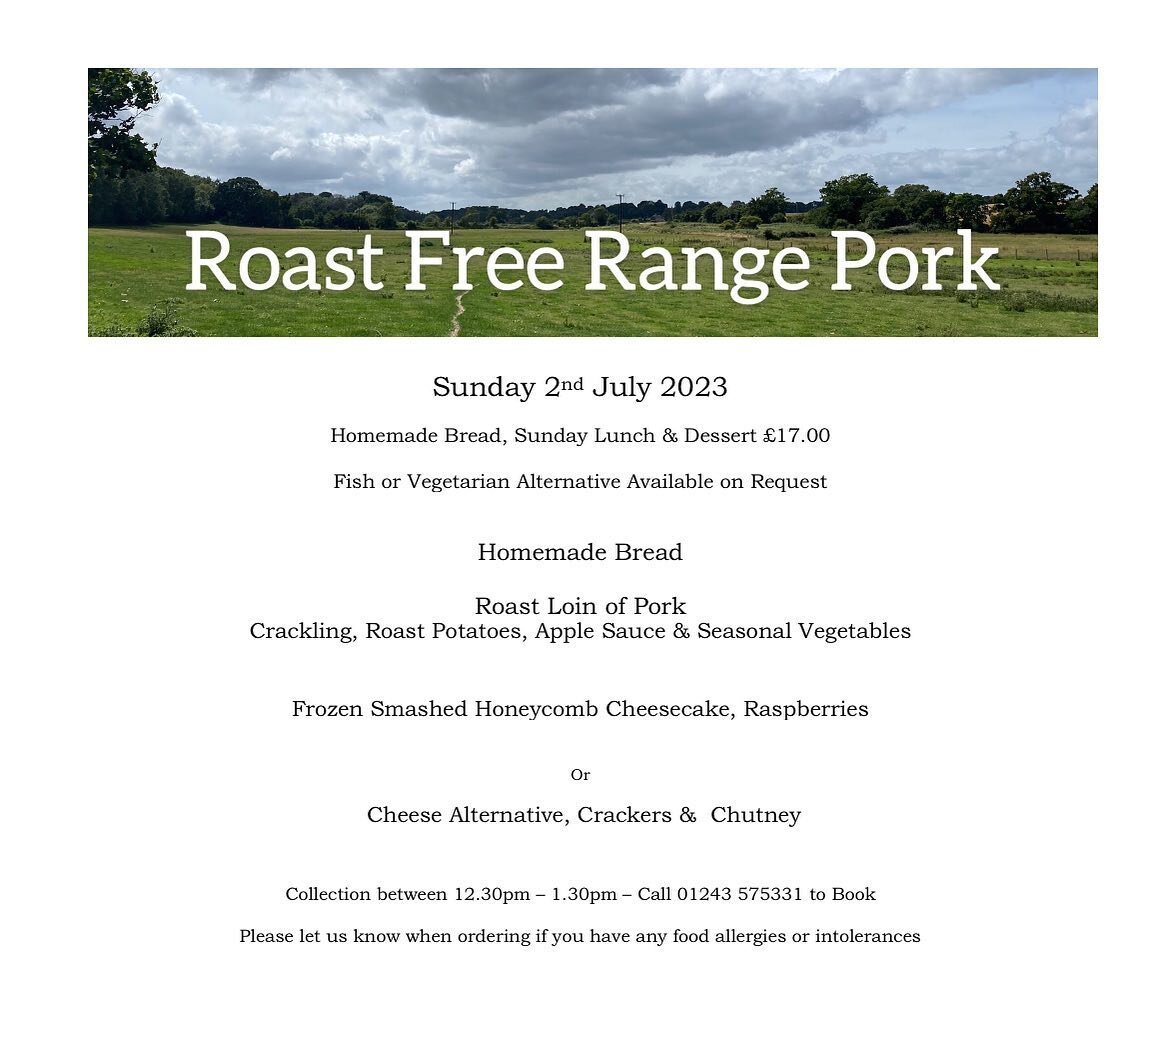 Sunday 2nd July 2023 - Take Away Lunch 🍴our cracking crackling is back! Enjoy our two-course Sunday lunch take away in the comfort of your home ☀️ for &pound;17.00 per person
.
🌱 Fish &amp; Vegetarian alternative available 
☎️ call 01243 575331 or 